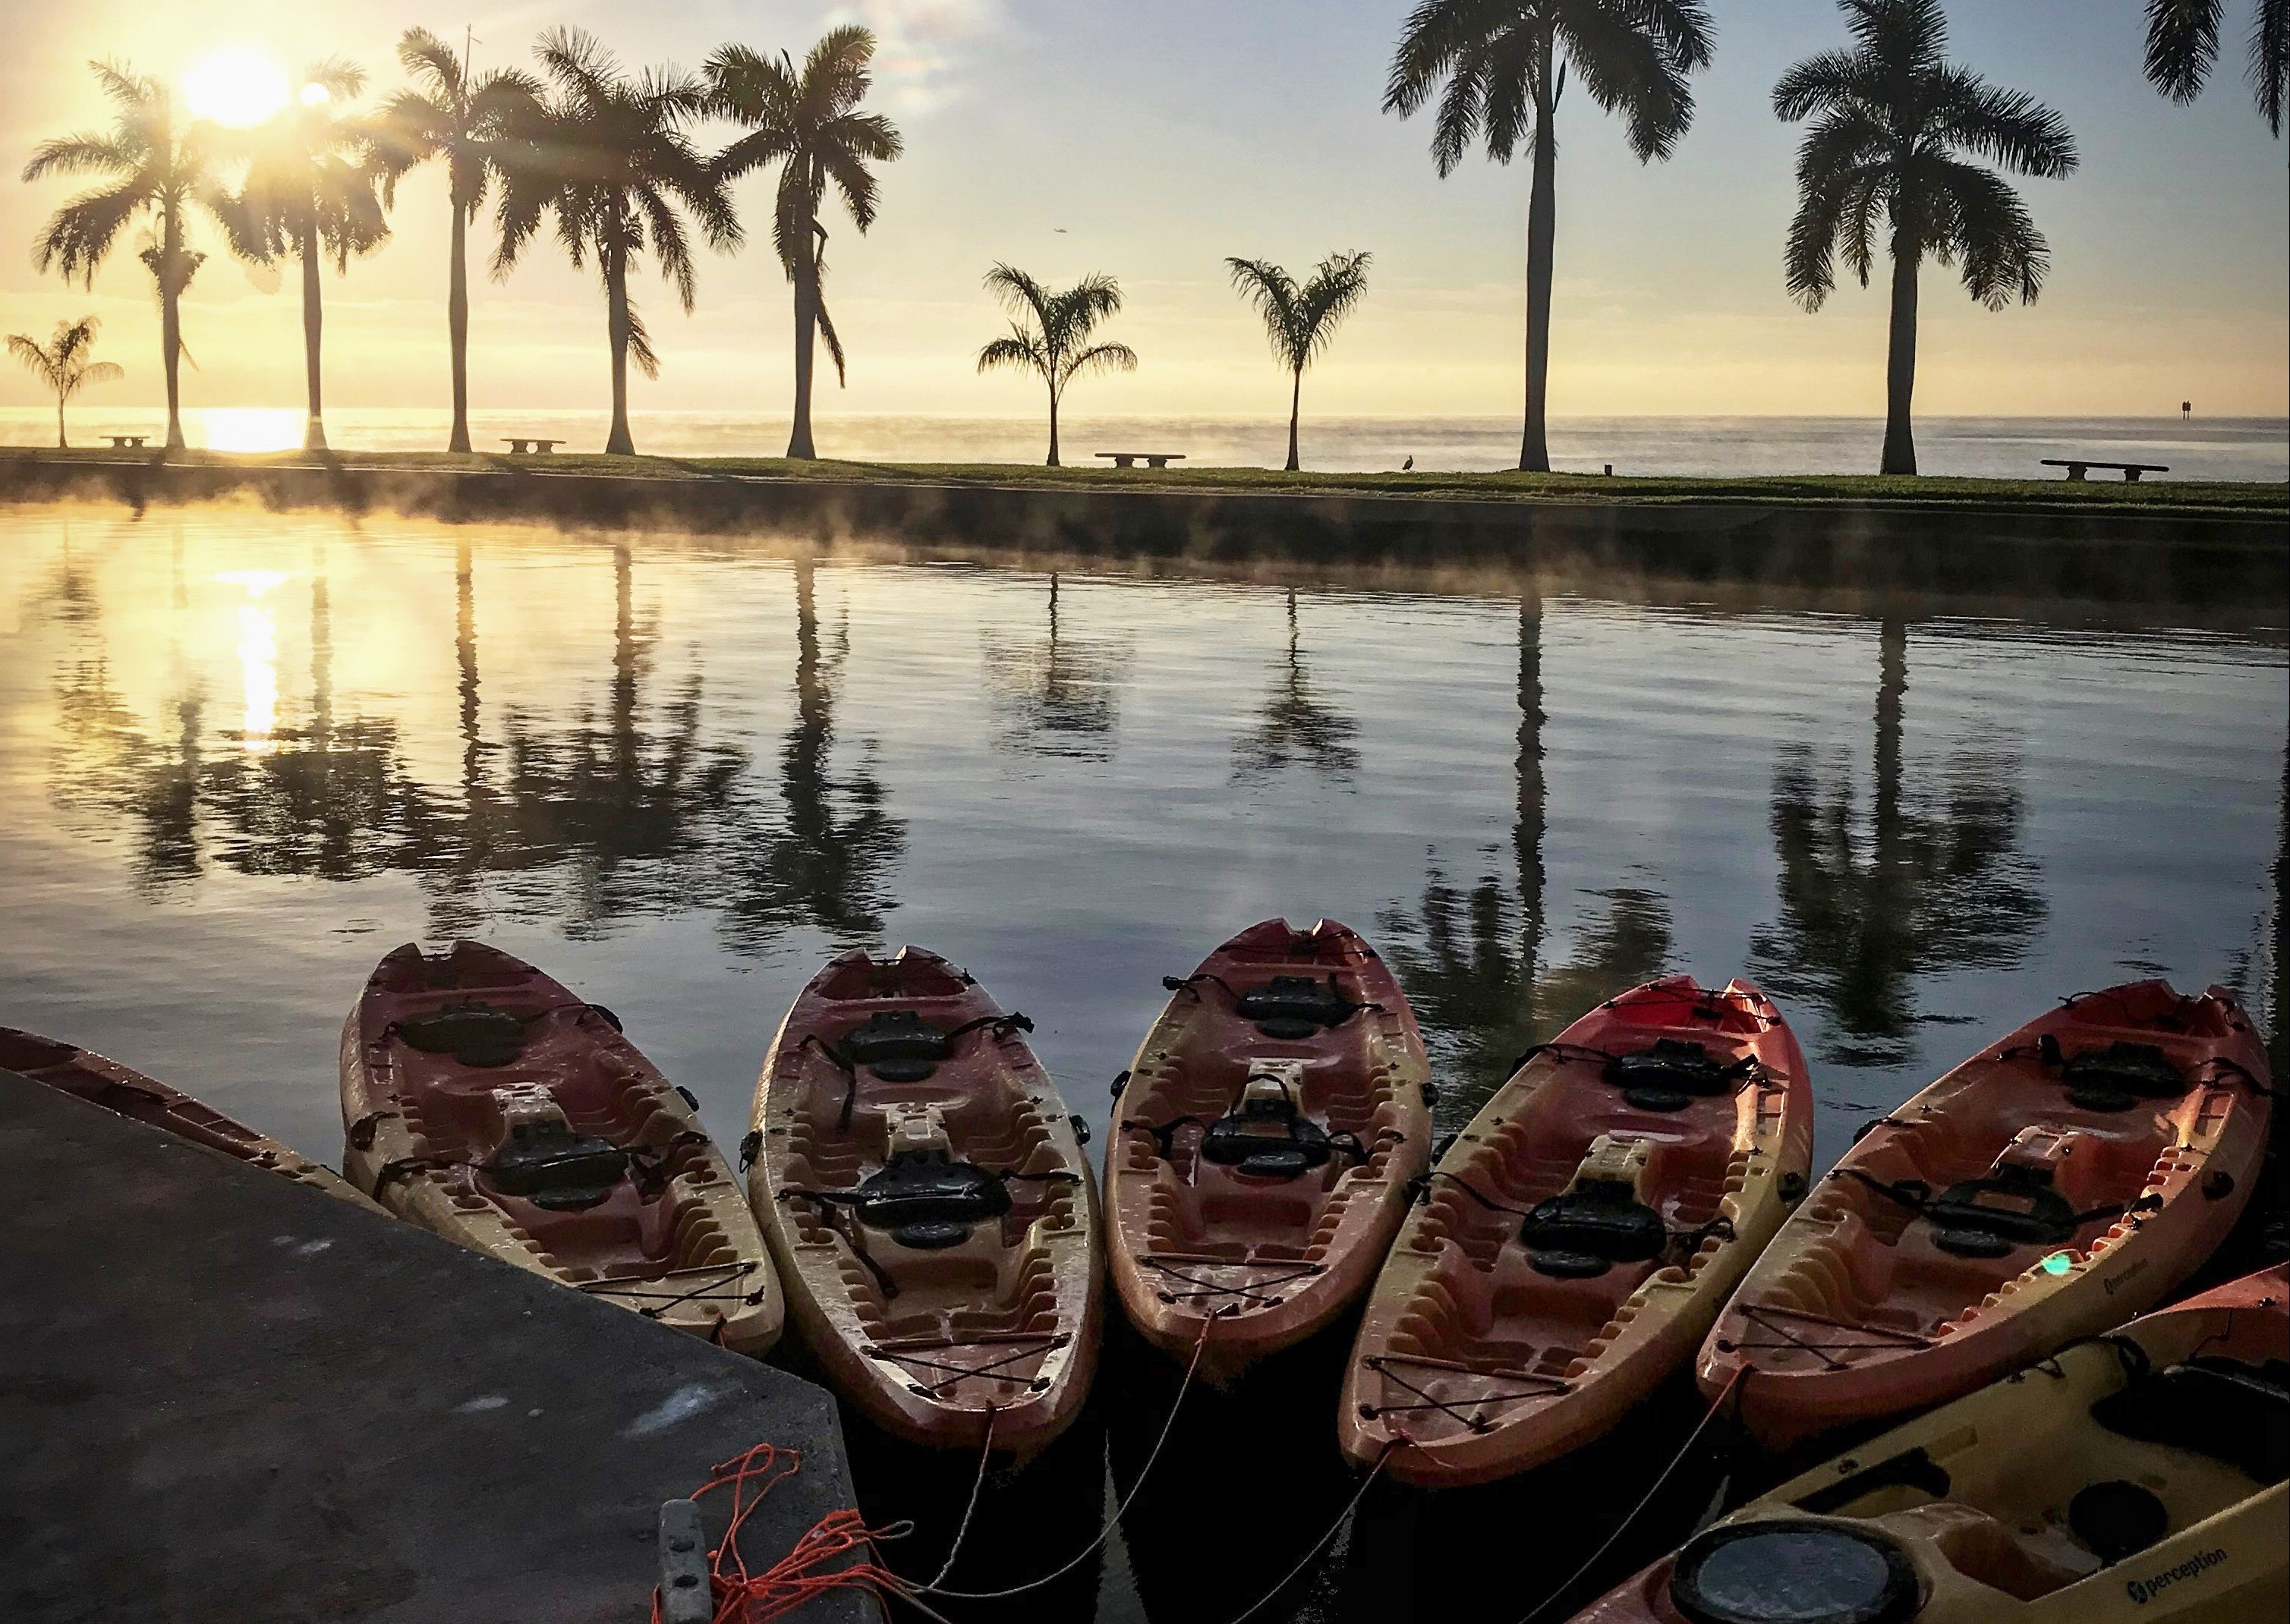 Group of kayaks tied together to the boat basin with the sun setting on the bay